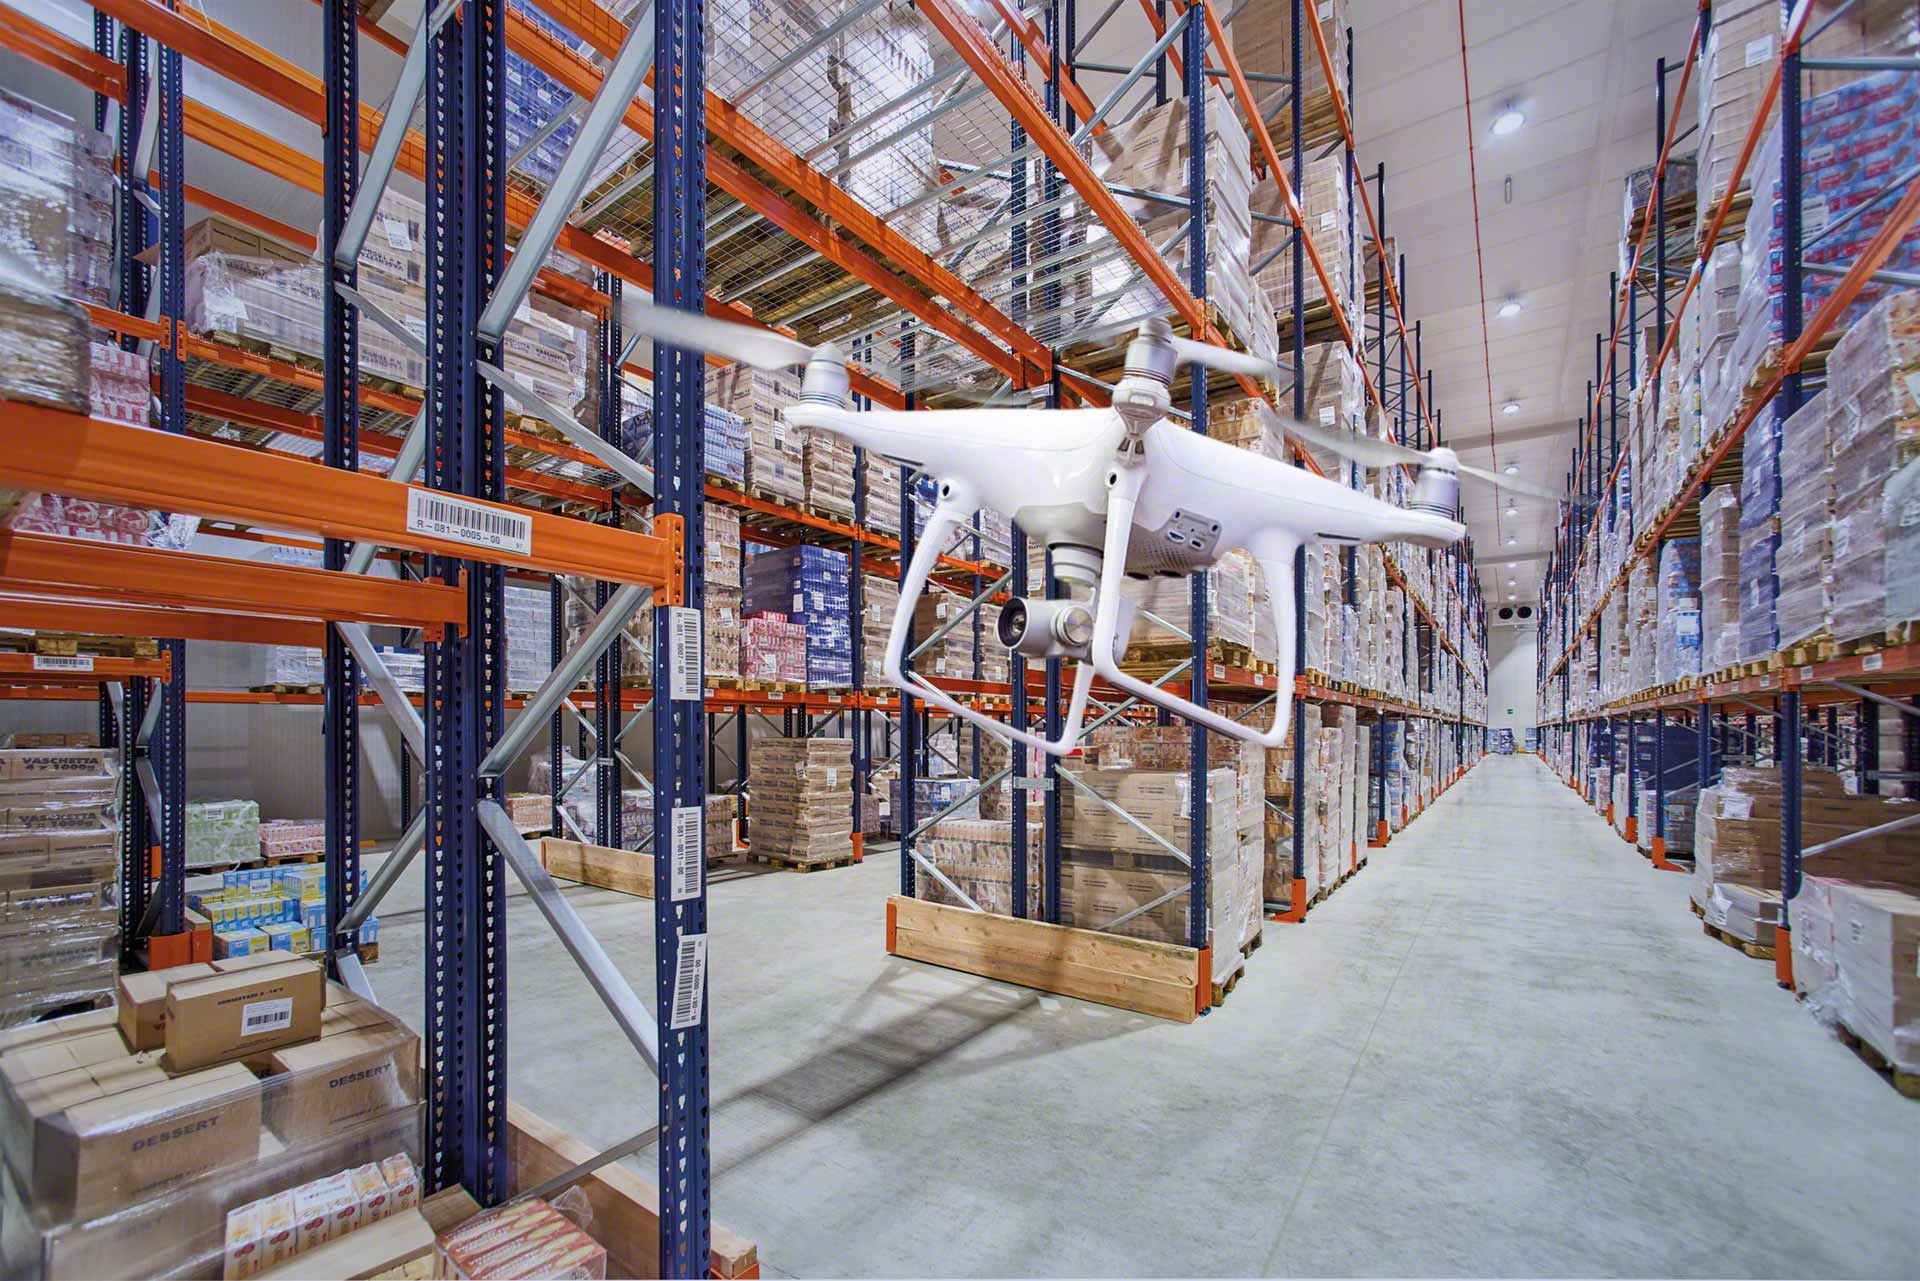 Drone inventory management: the future of stock control?